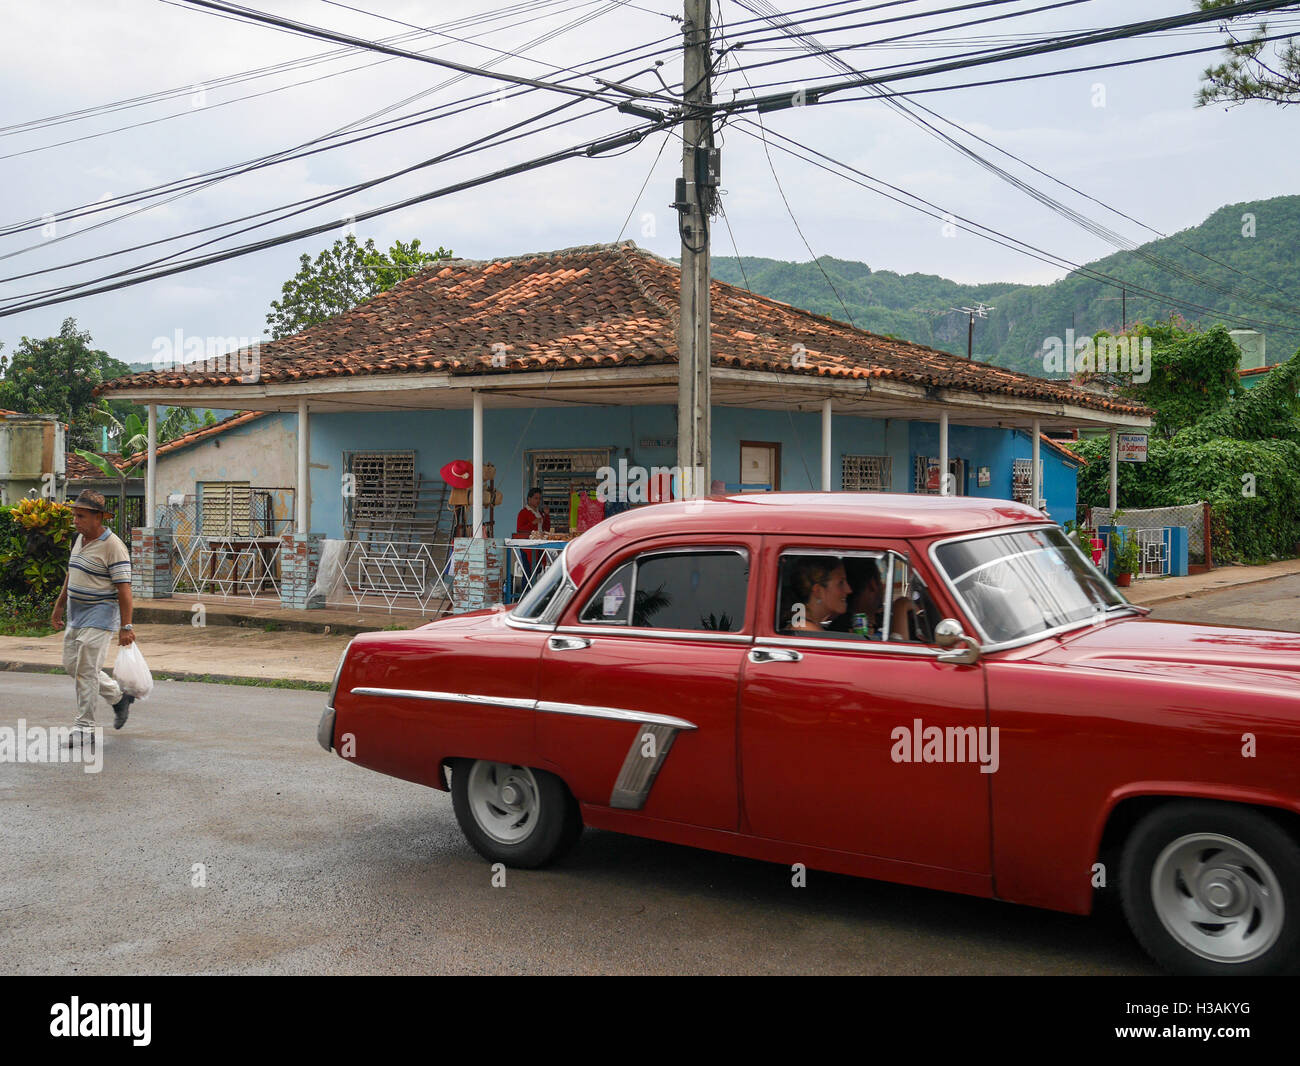 City center on Vinjales Cuba where streets intersects. People are walking driving cars and riding bikes. Stock Photo